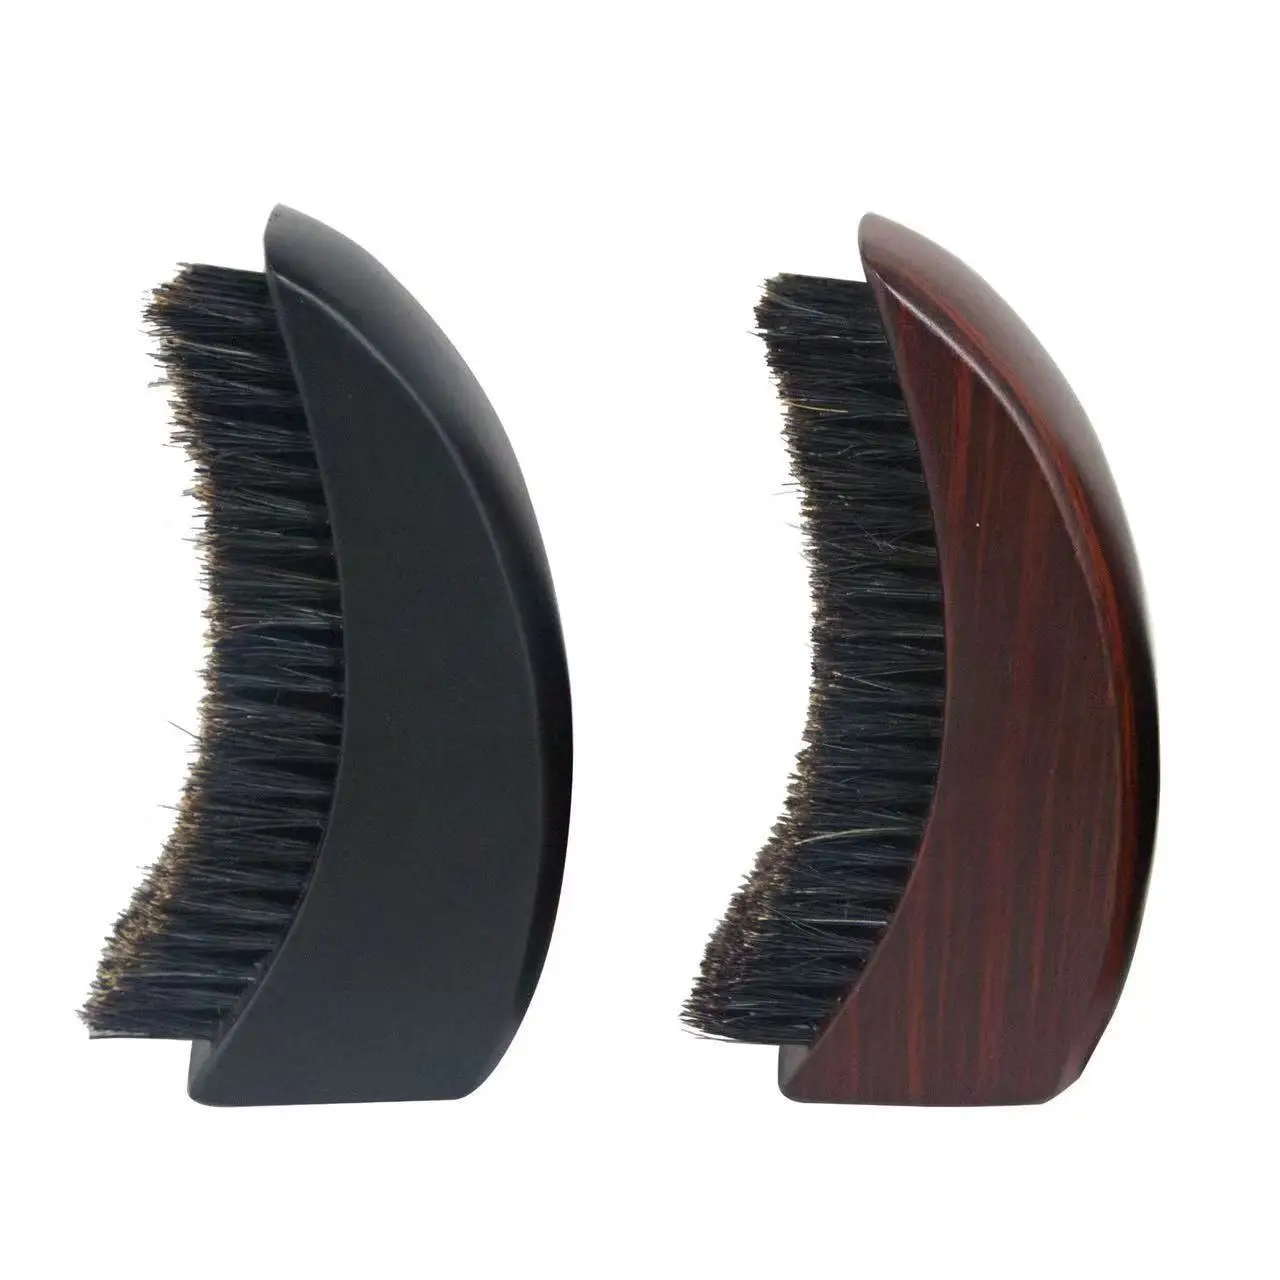 New Type Professional Boar Bristle Nylon Cleaning Curly Hair Styling Wave Brush Curling Brush Beard Shaping Brush